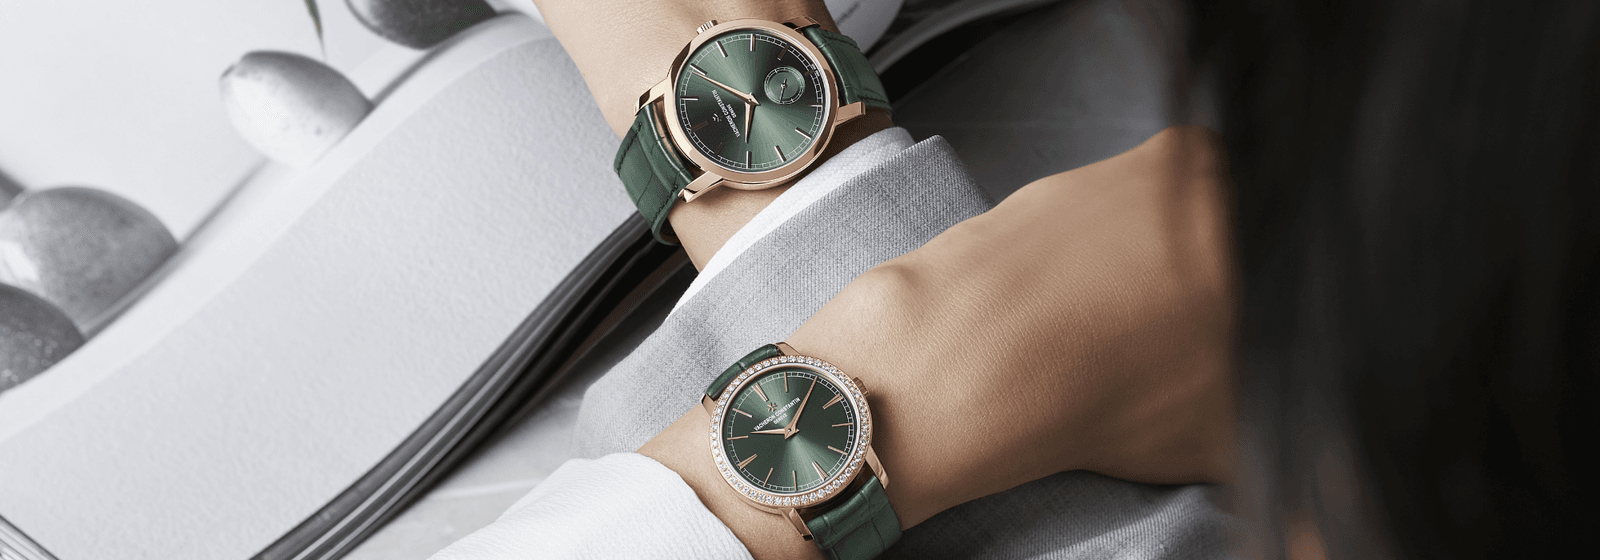 Vacheron Constantin Expands Its Traditionnelle Collection With A His And Hers Duo Of Classical Timepieces Dressed In Contemporary Hues Of Green